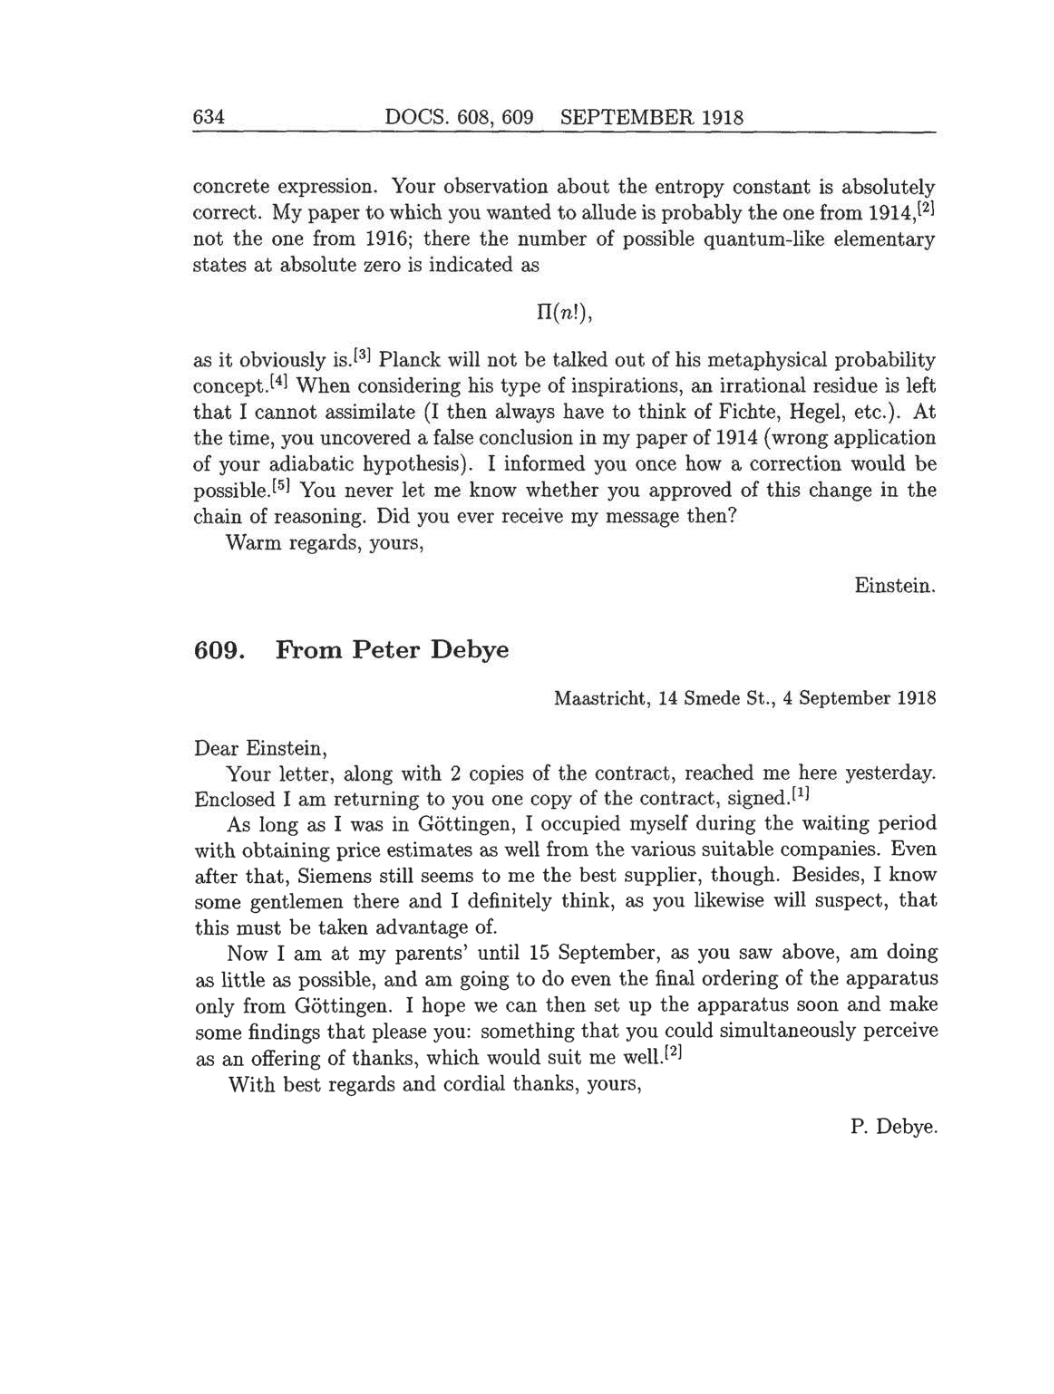 Volume 8: The Berlin Years: Correspondence, 1914-1918 (English translation supplement) page 634